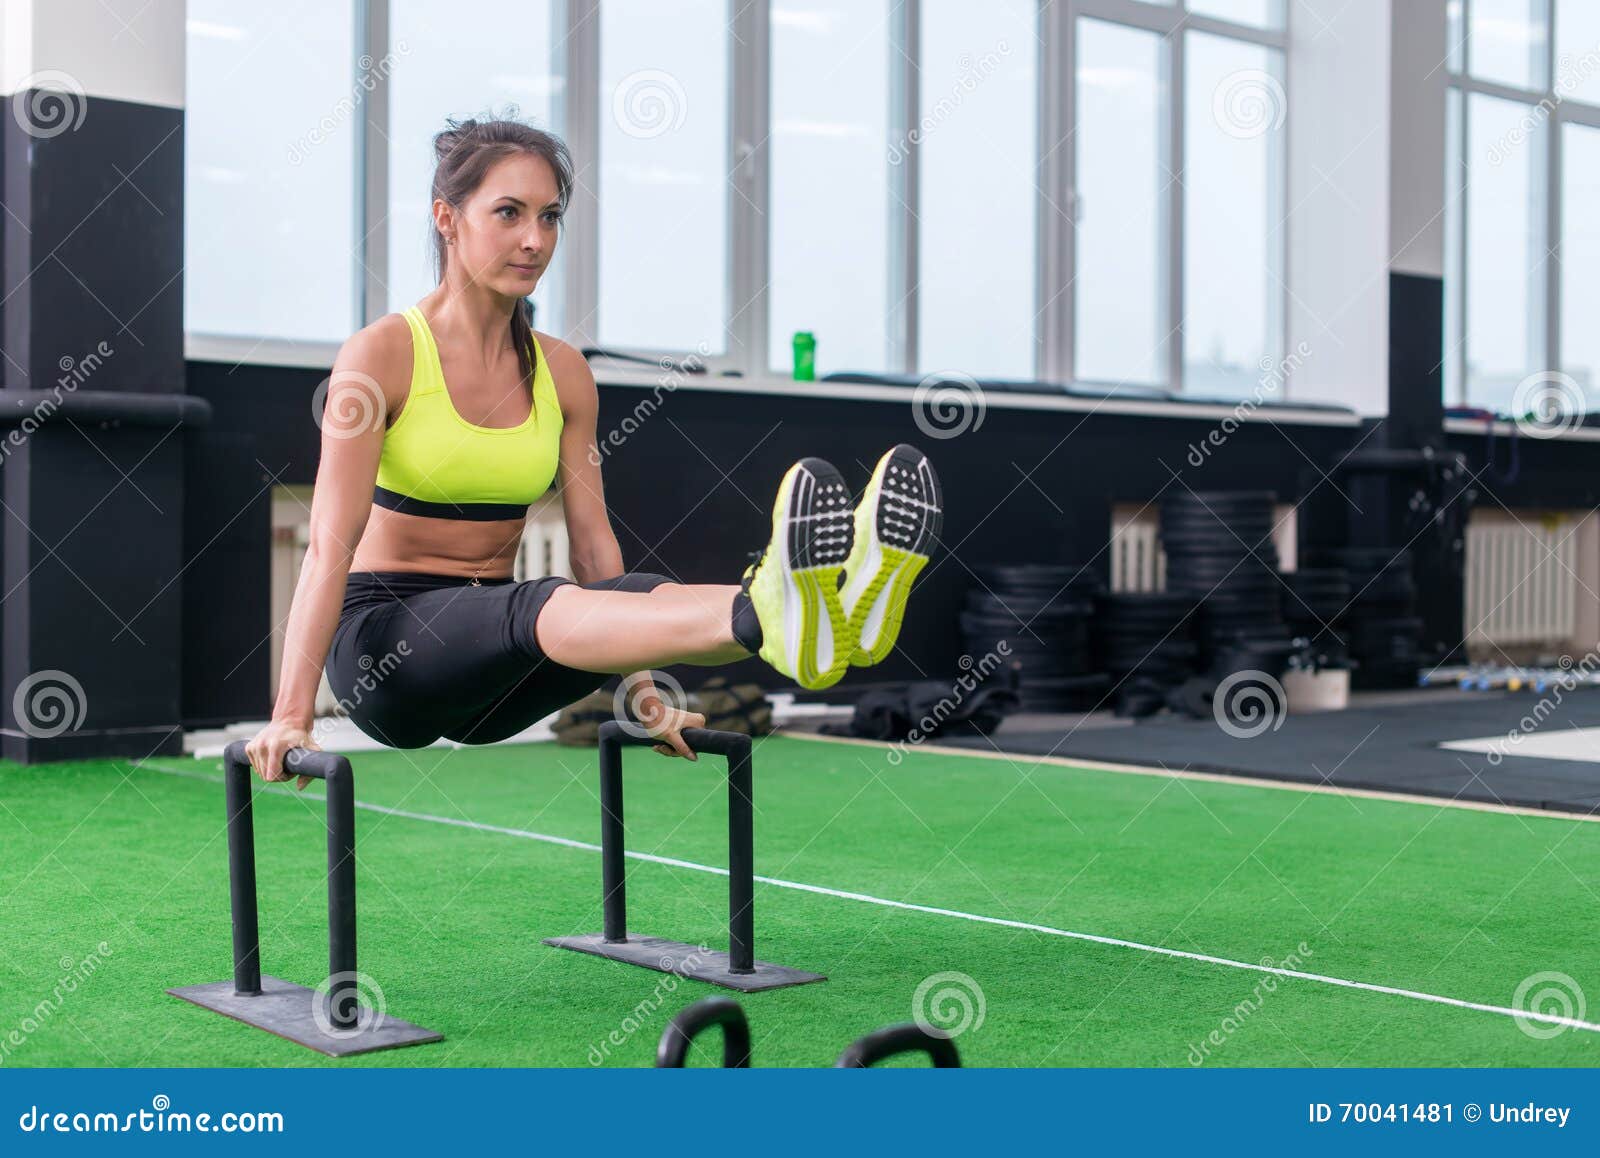 https://thumbs.dreamstime.com/z/fit-strong-woman-doing-l-sits-work-out-gym-lifting-up-her-legs-using-parallel-bars-70041481.jpg